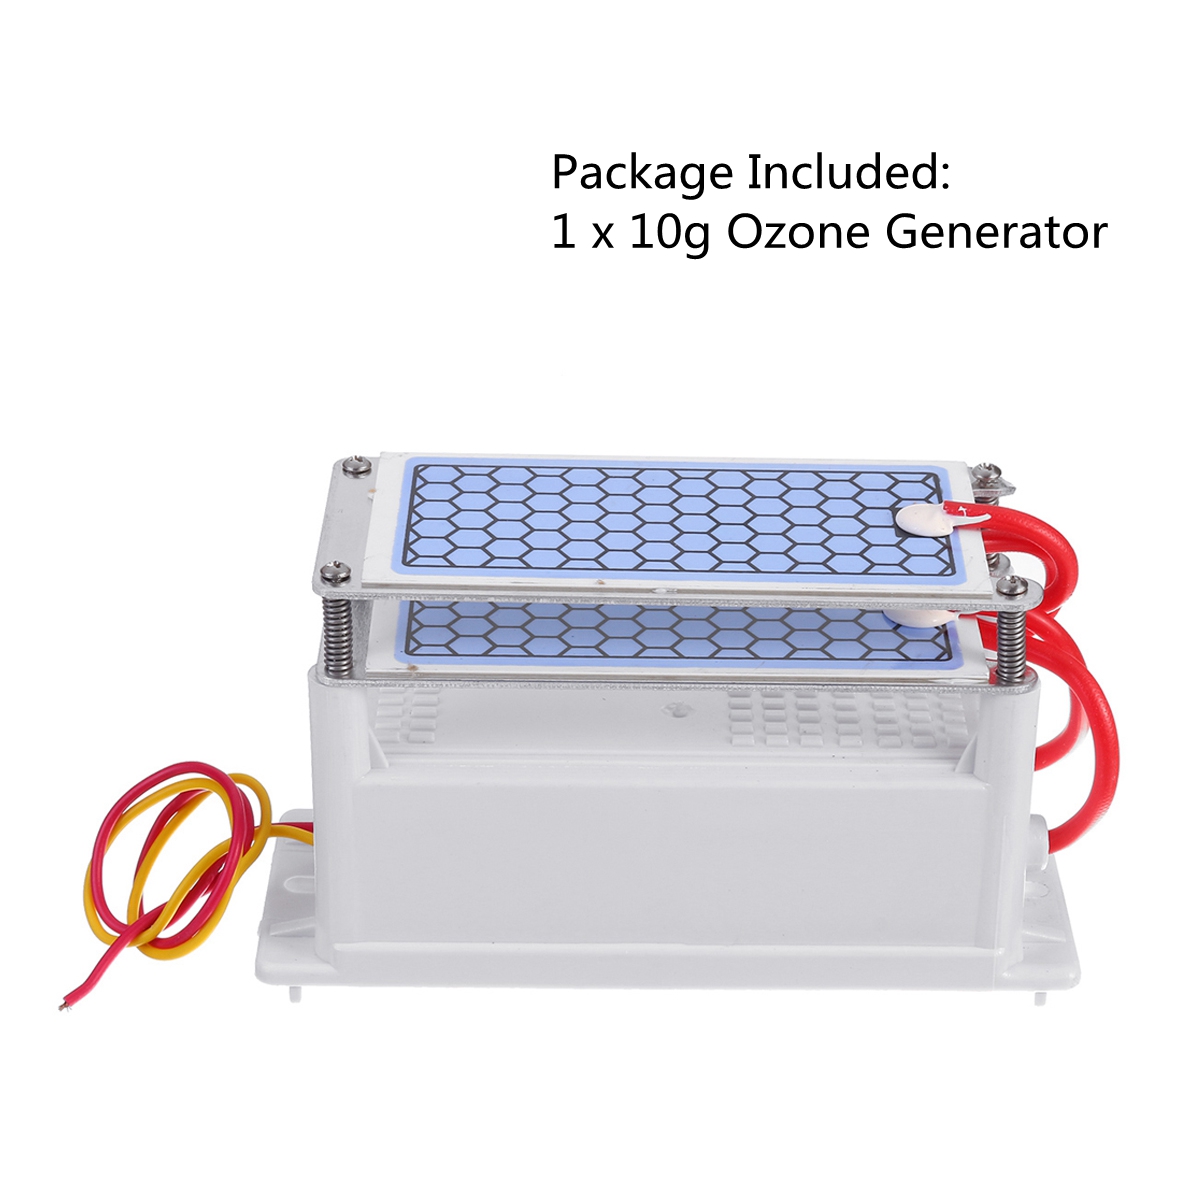 10g-Ozone-Generator-Ozone-Disinfection-Machine-Home--Commercial-Air-Purifier-Cleaner-Ozone-Generator-1716600-3